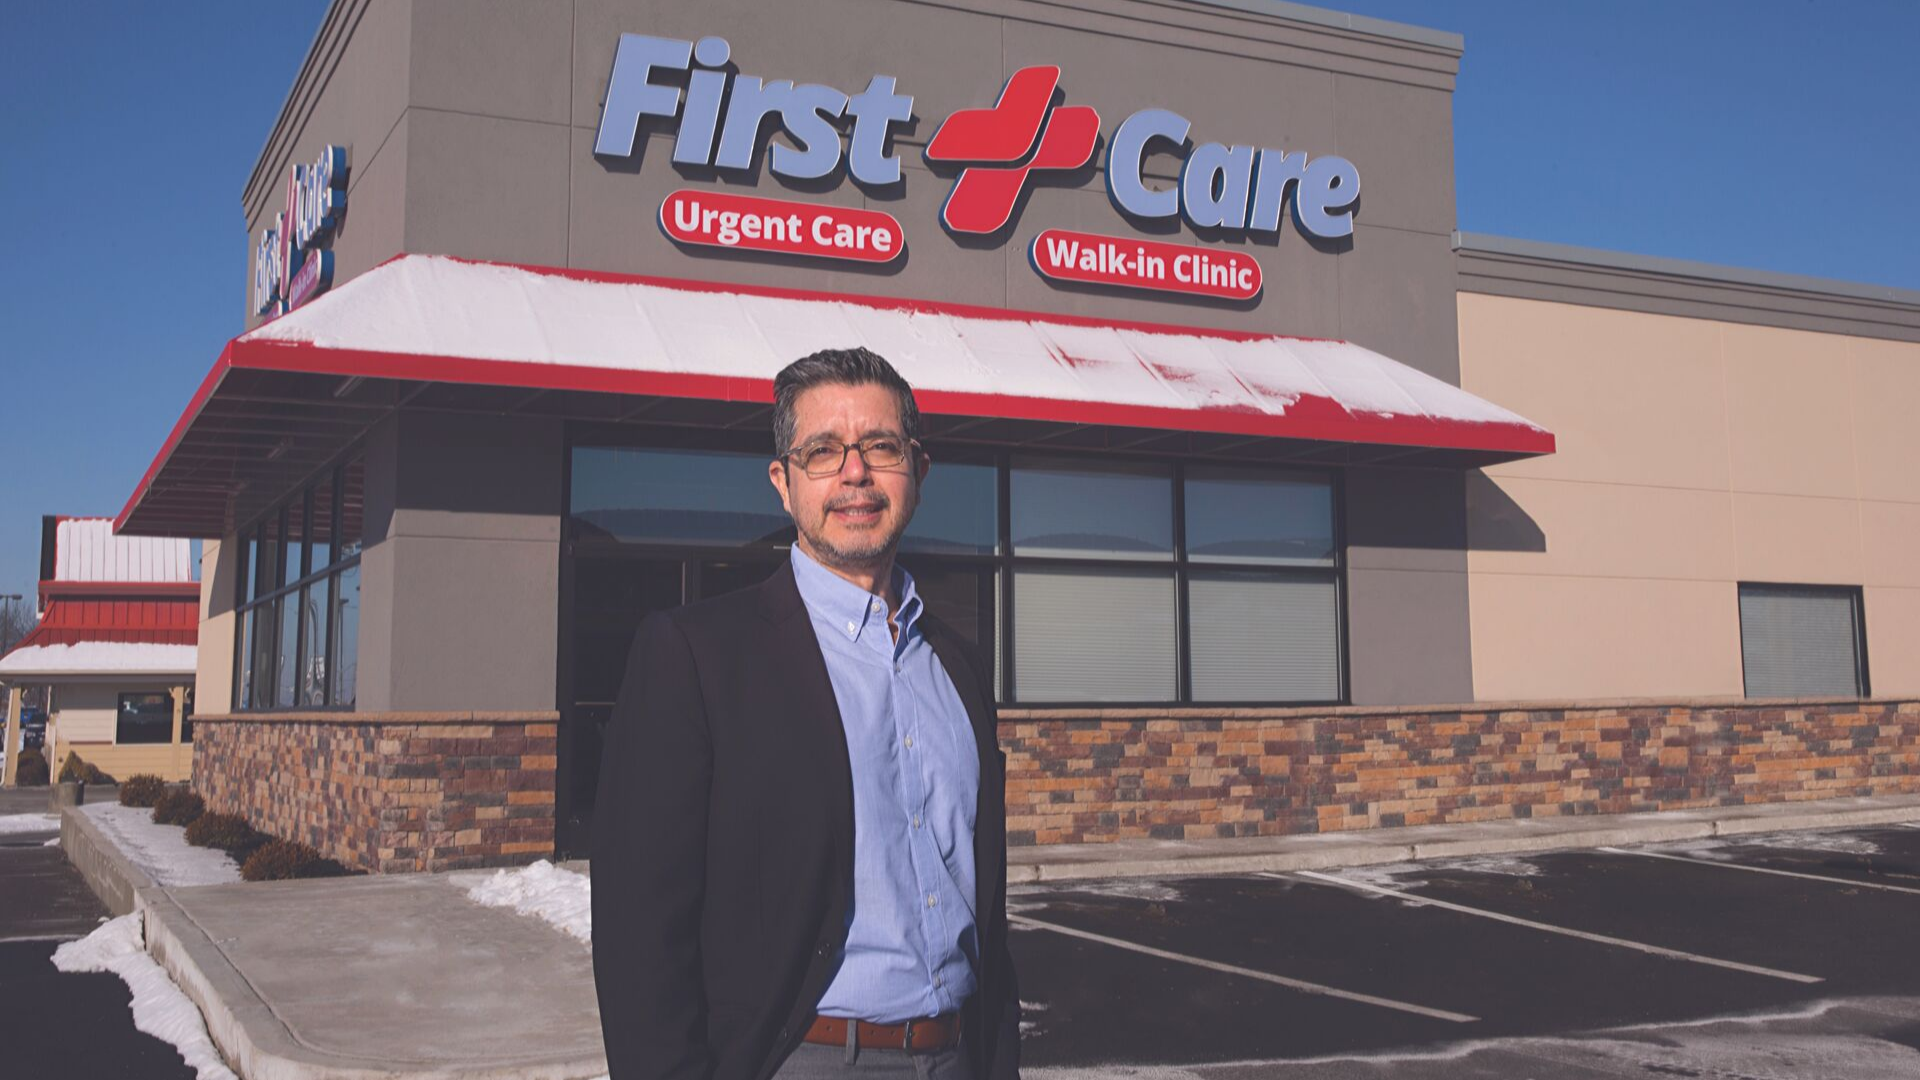 First Care Clinics